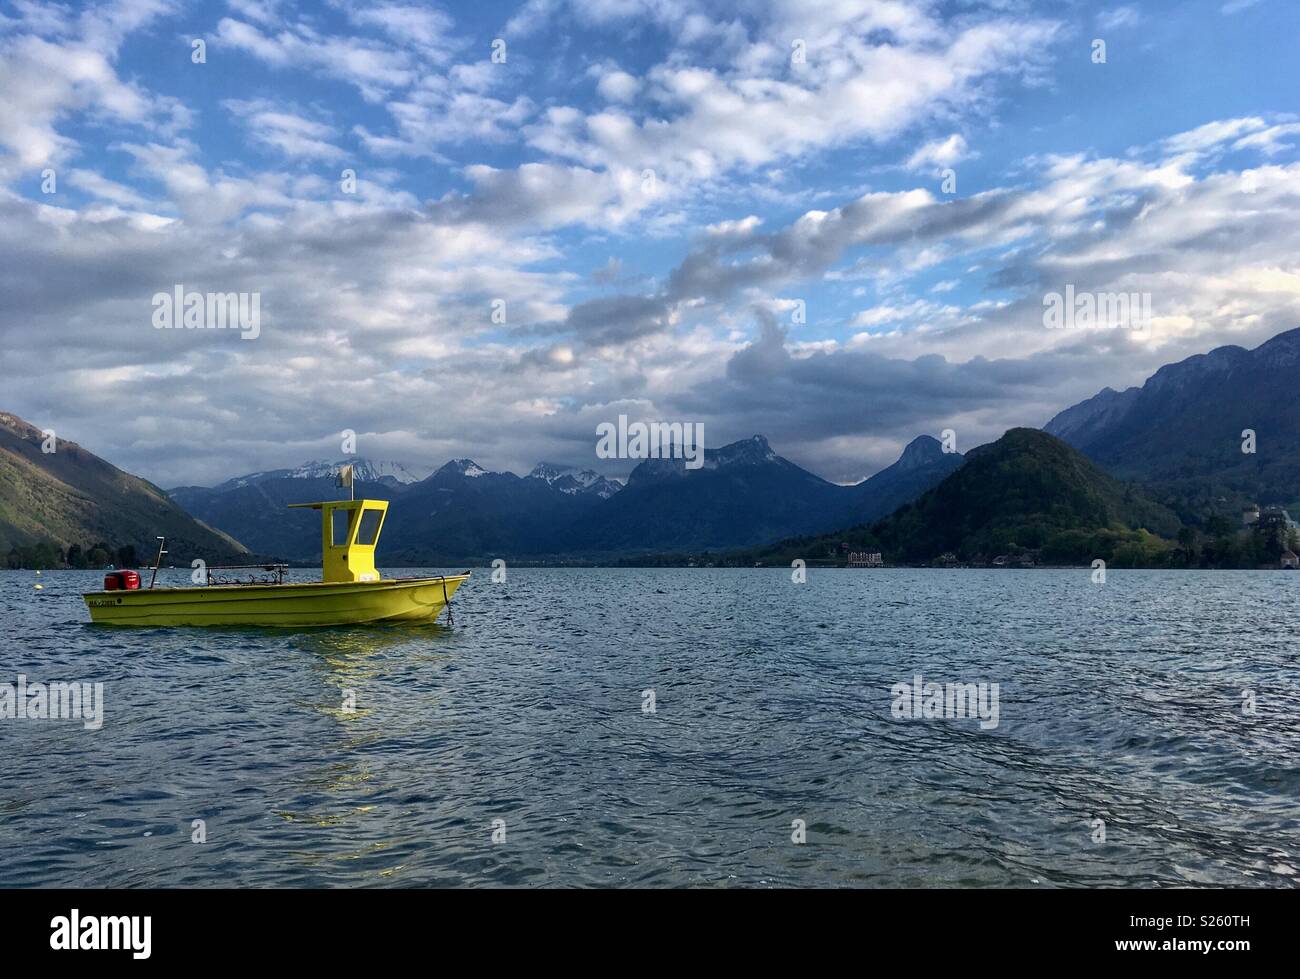 Yellow boat on Lake Annecy, France Stock Photo